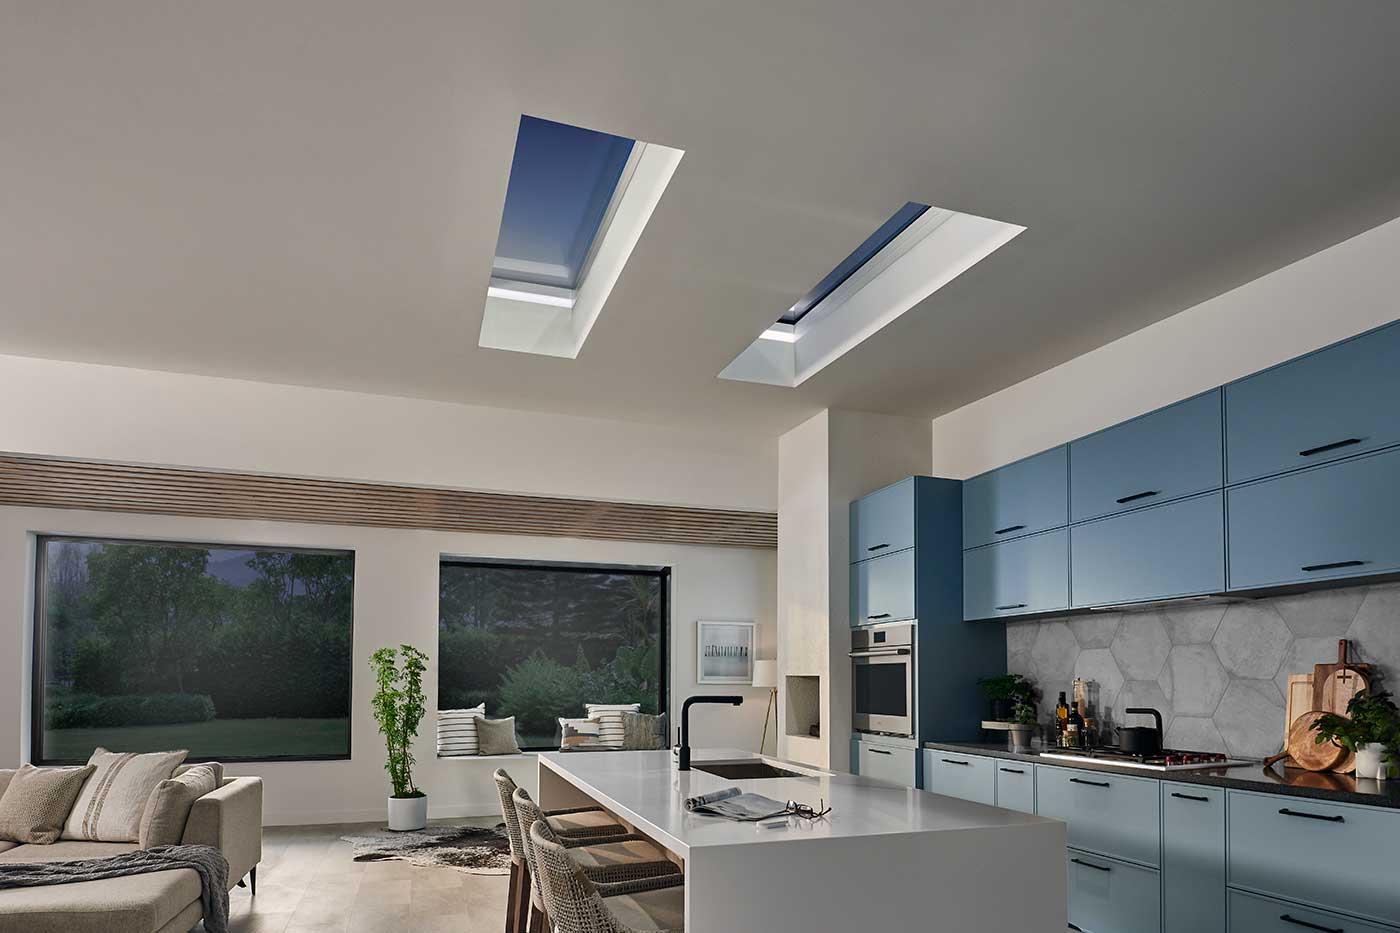 A modern kitchen at night with white countertops, blue cabinets, two Marvin Awaken Skylights and two Marvin Skycoves.